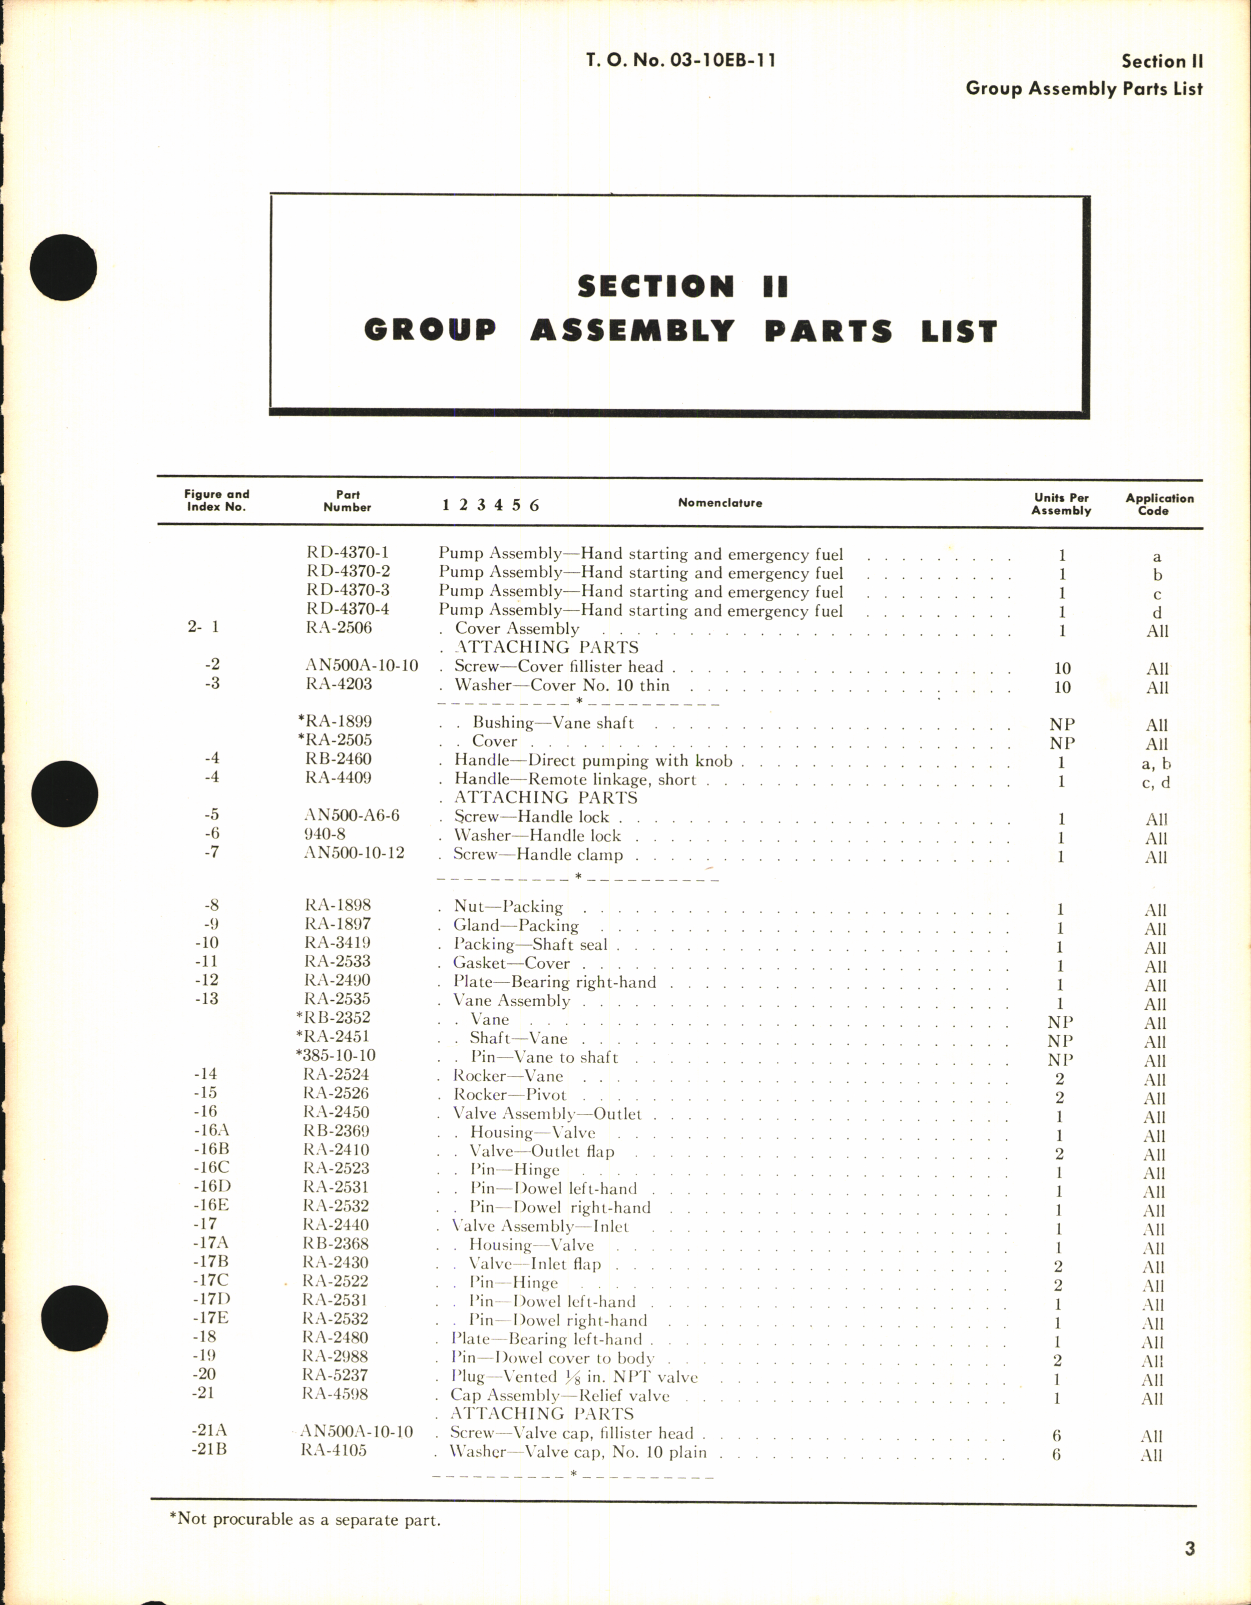 Sample page 5 from AirCorps Library document: Parts Catalog for USAF Type D-2A Hand Fuel Pumps Model RD-4370 Series